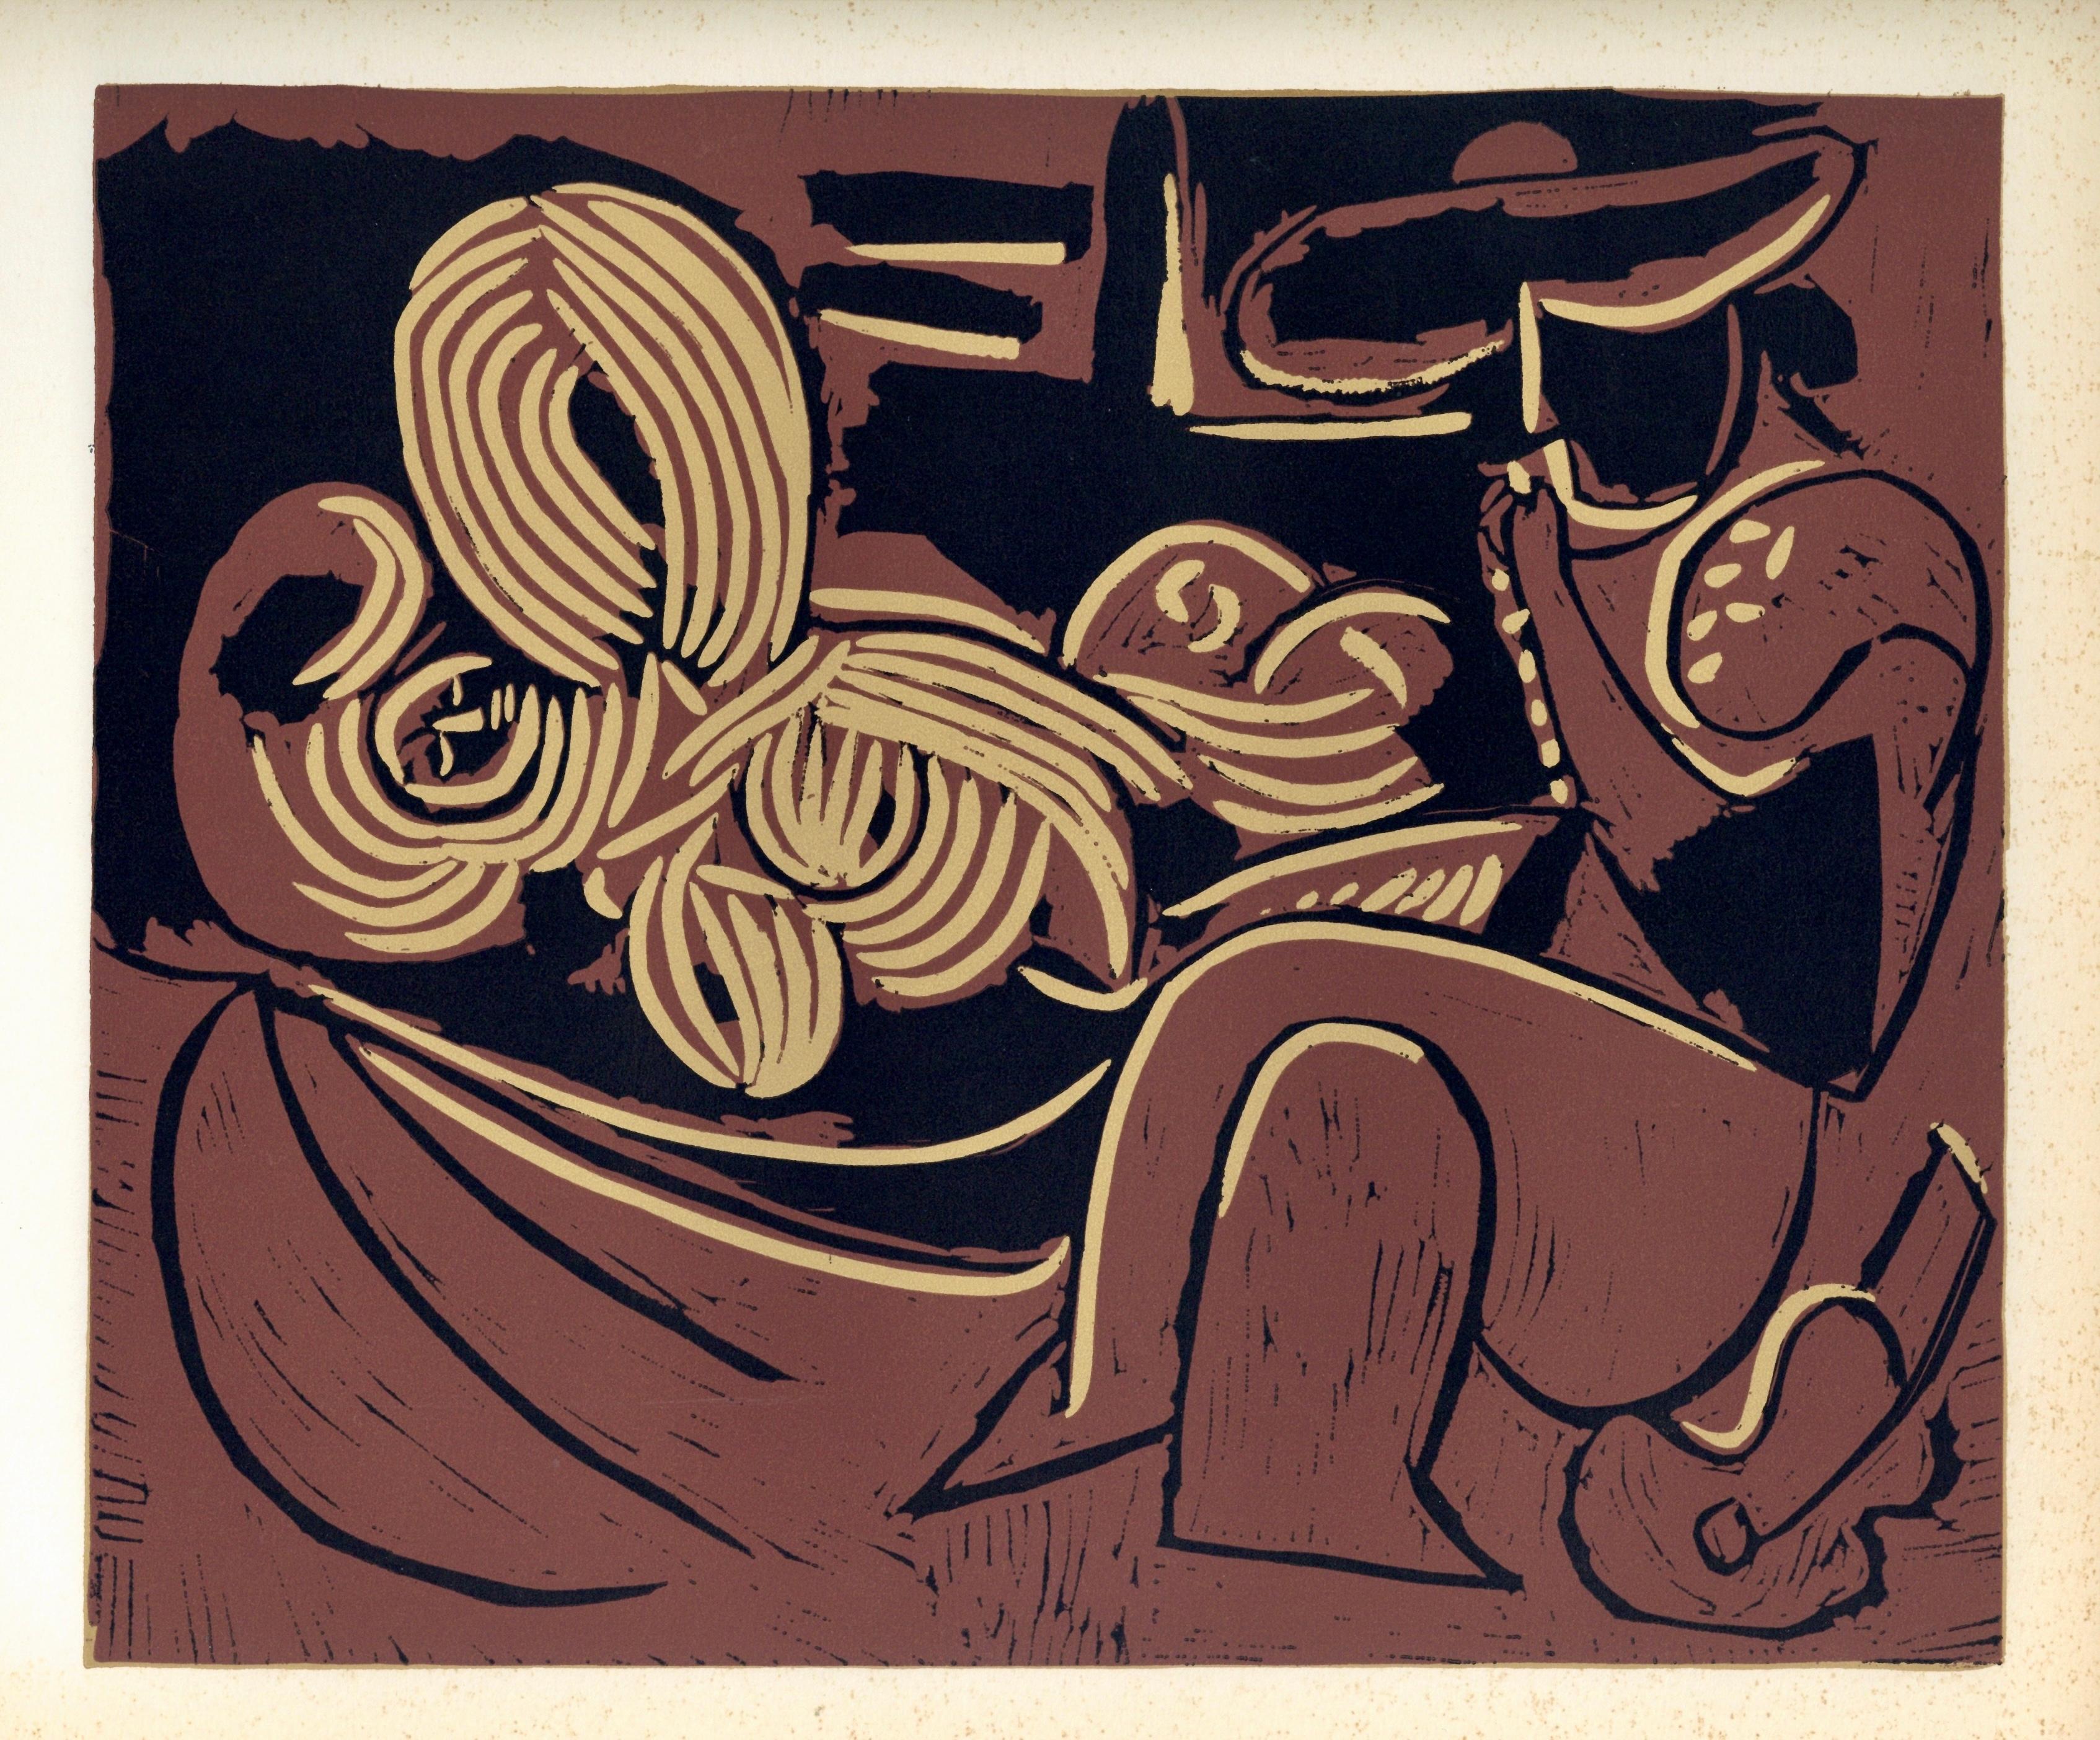 Picasso, The Aubade with Sleeping Woman, Pablo Picasso-Linogravures (after) For Sale 2